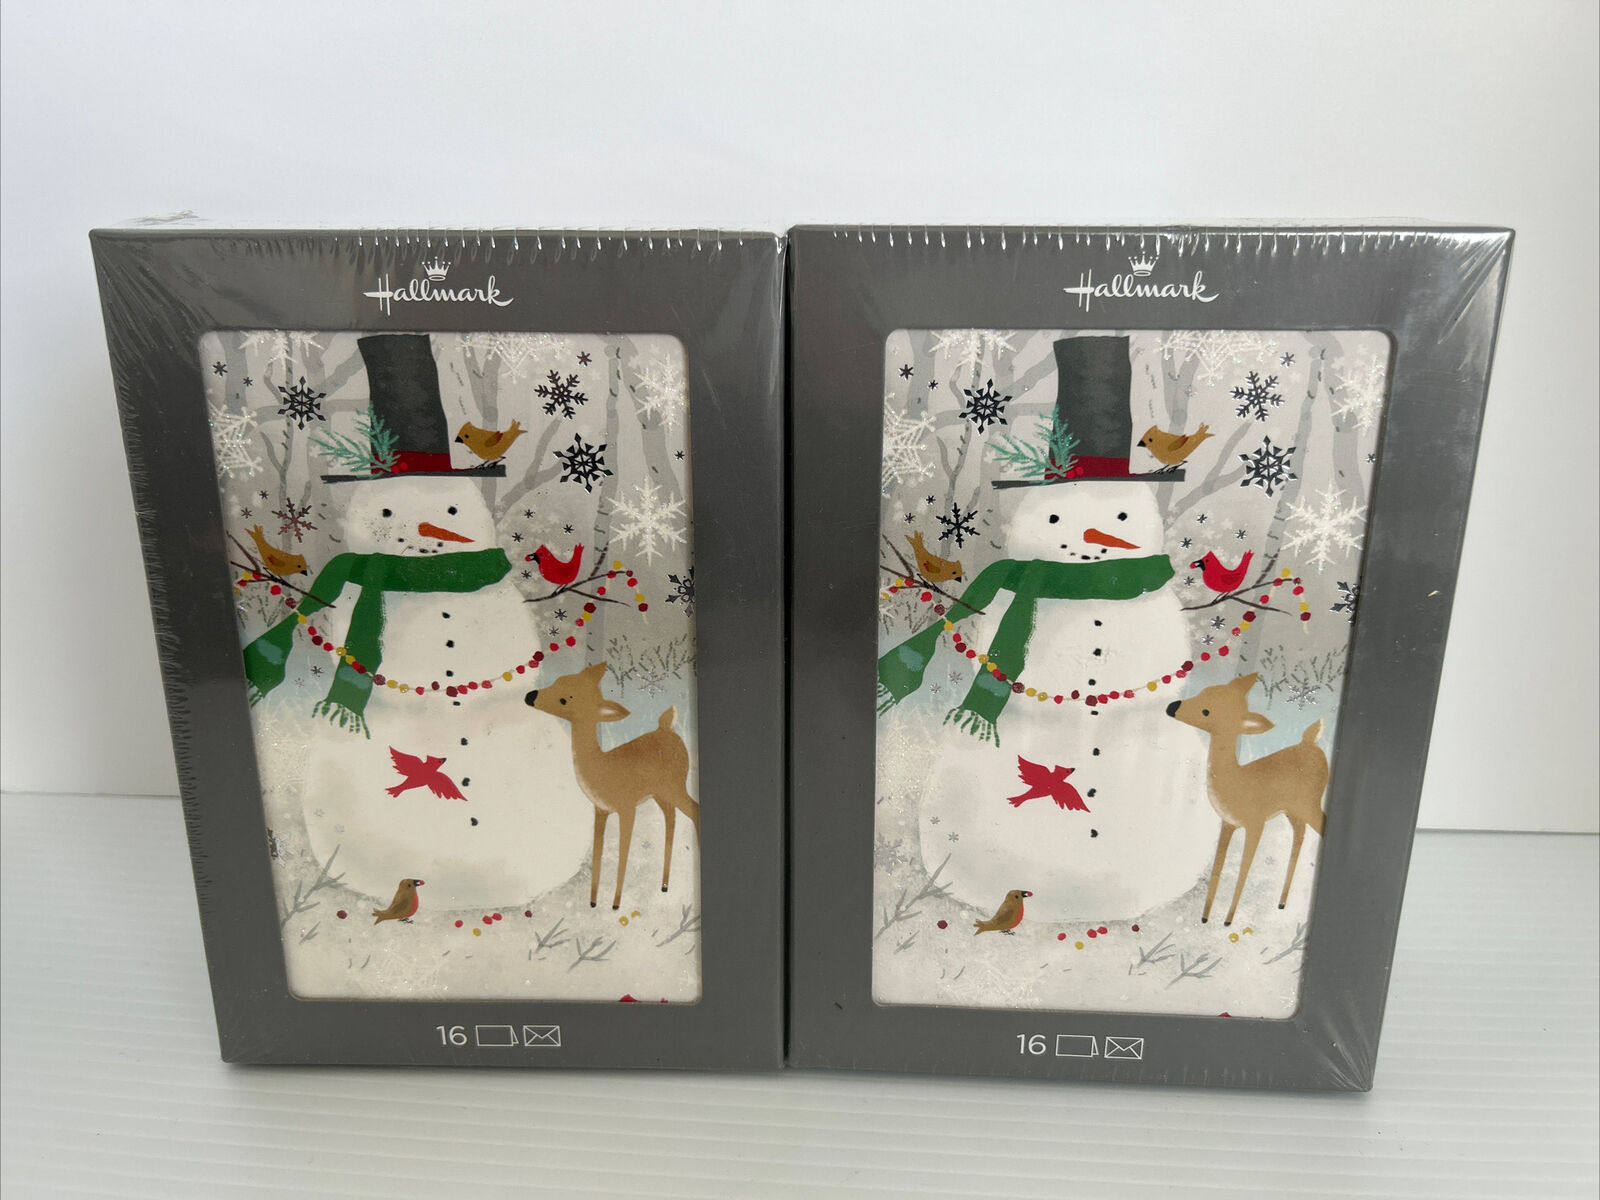 Hallmark Set Of 4 boxes Christmas Cards 16 CT Per Box Snowman with Deer